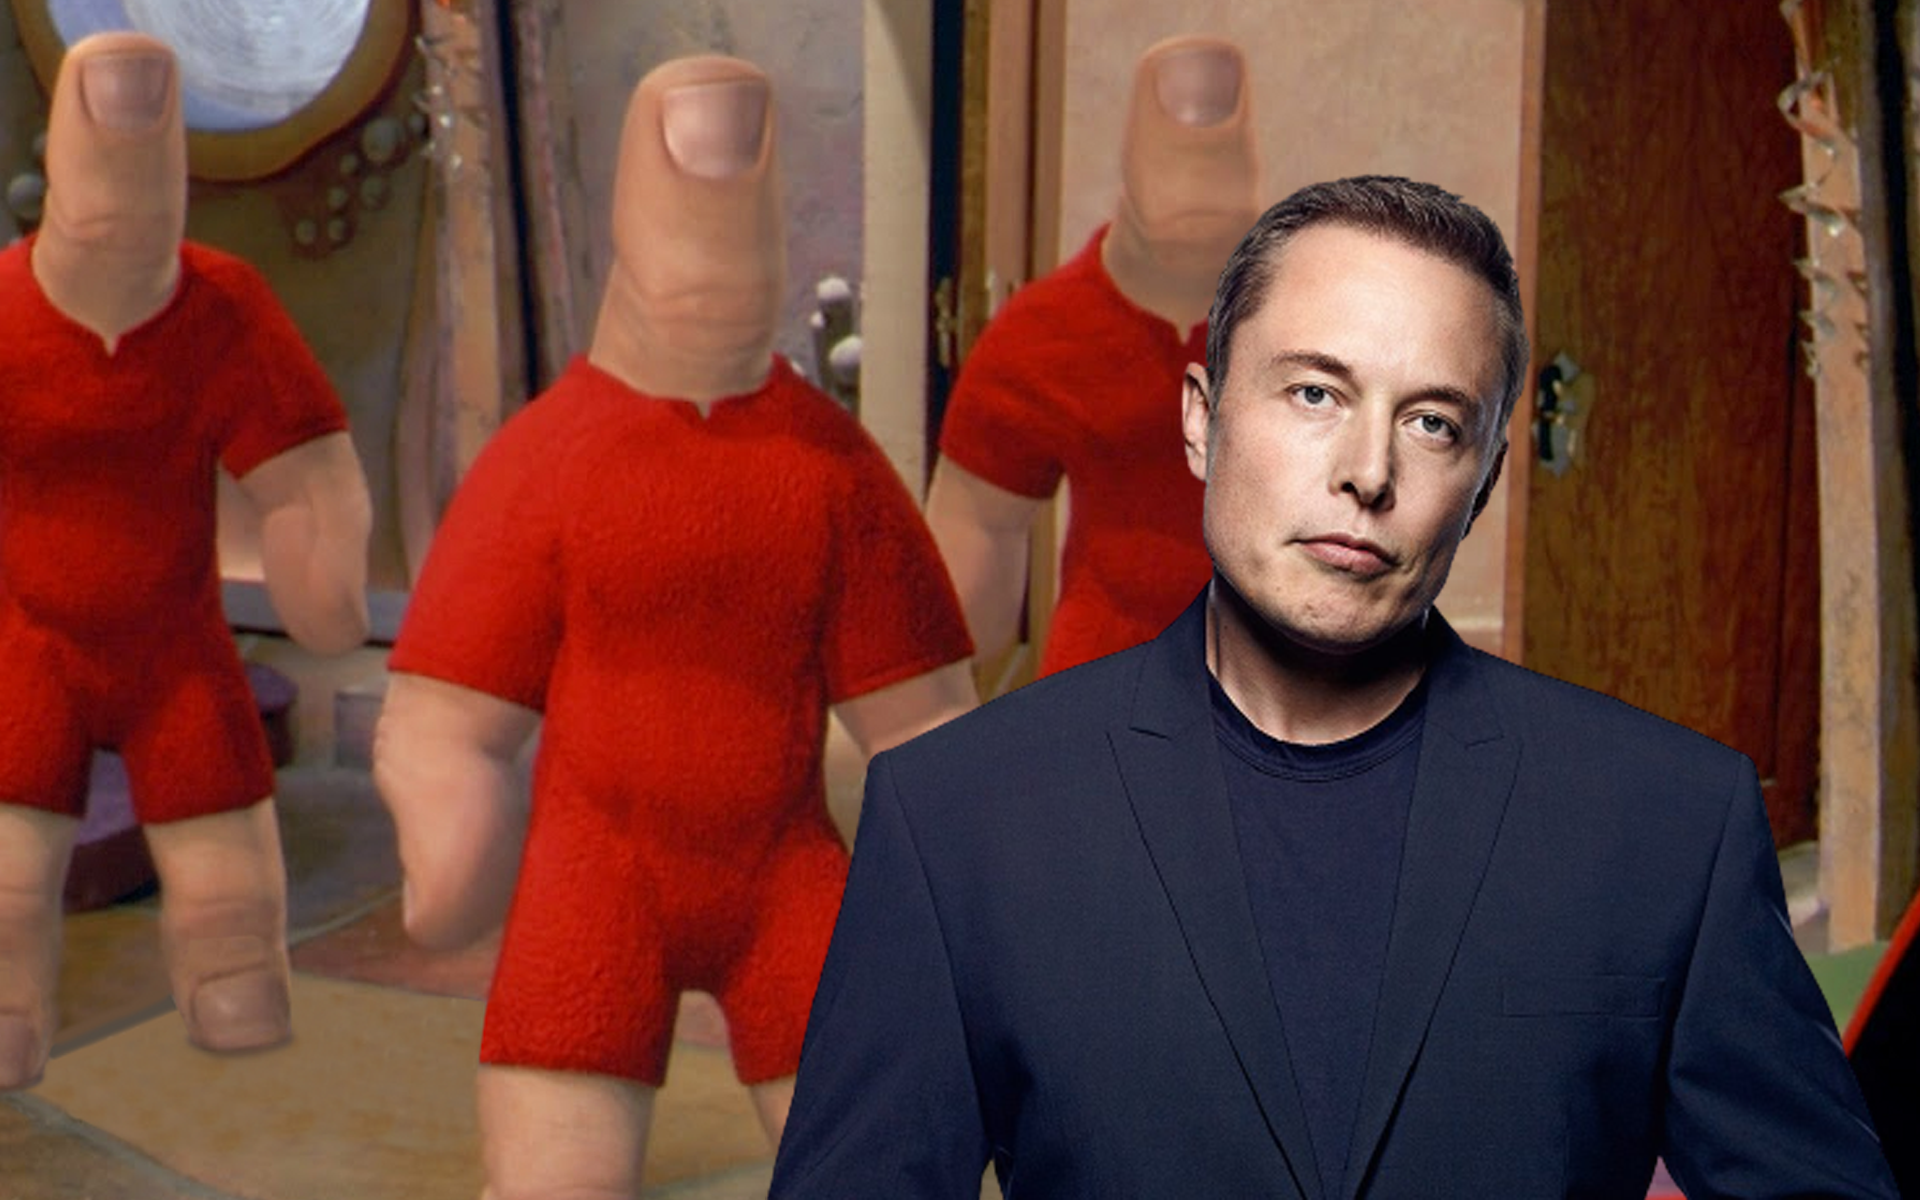 FACT CHECK: Elon Musk Does NOT Have "Army Of Thumb Thumbs" Ready To Impose Martial Law